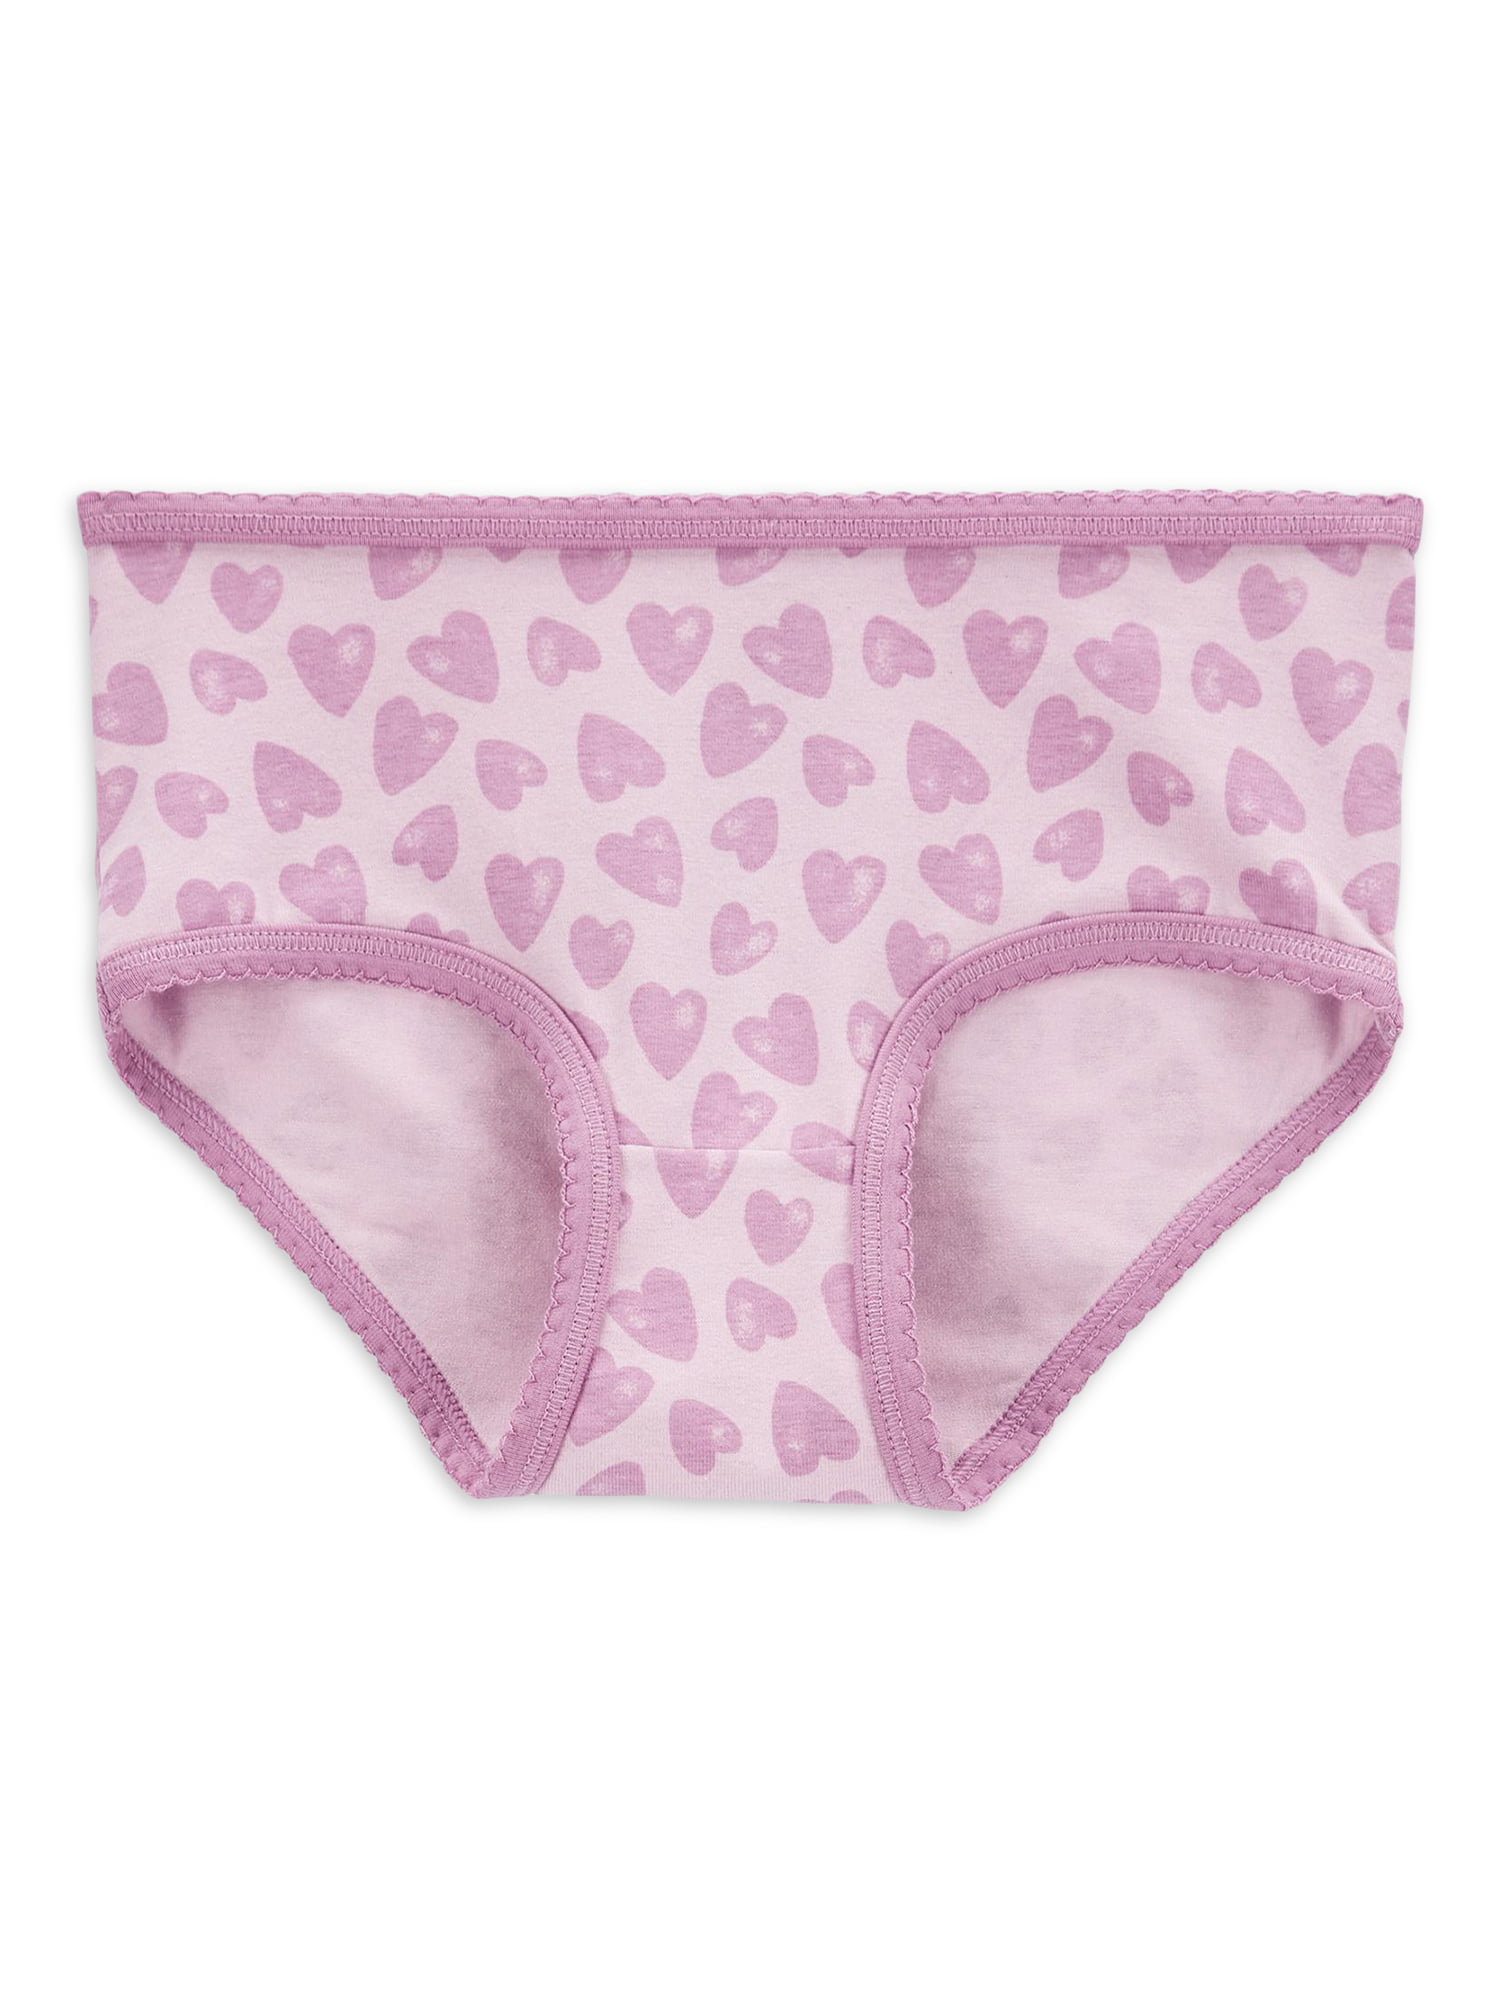 Product Reviews, Two-pieces girl's underwear 13-14, Wholesale Two-pieces  girl's underwear 13-14